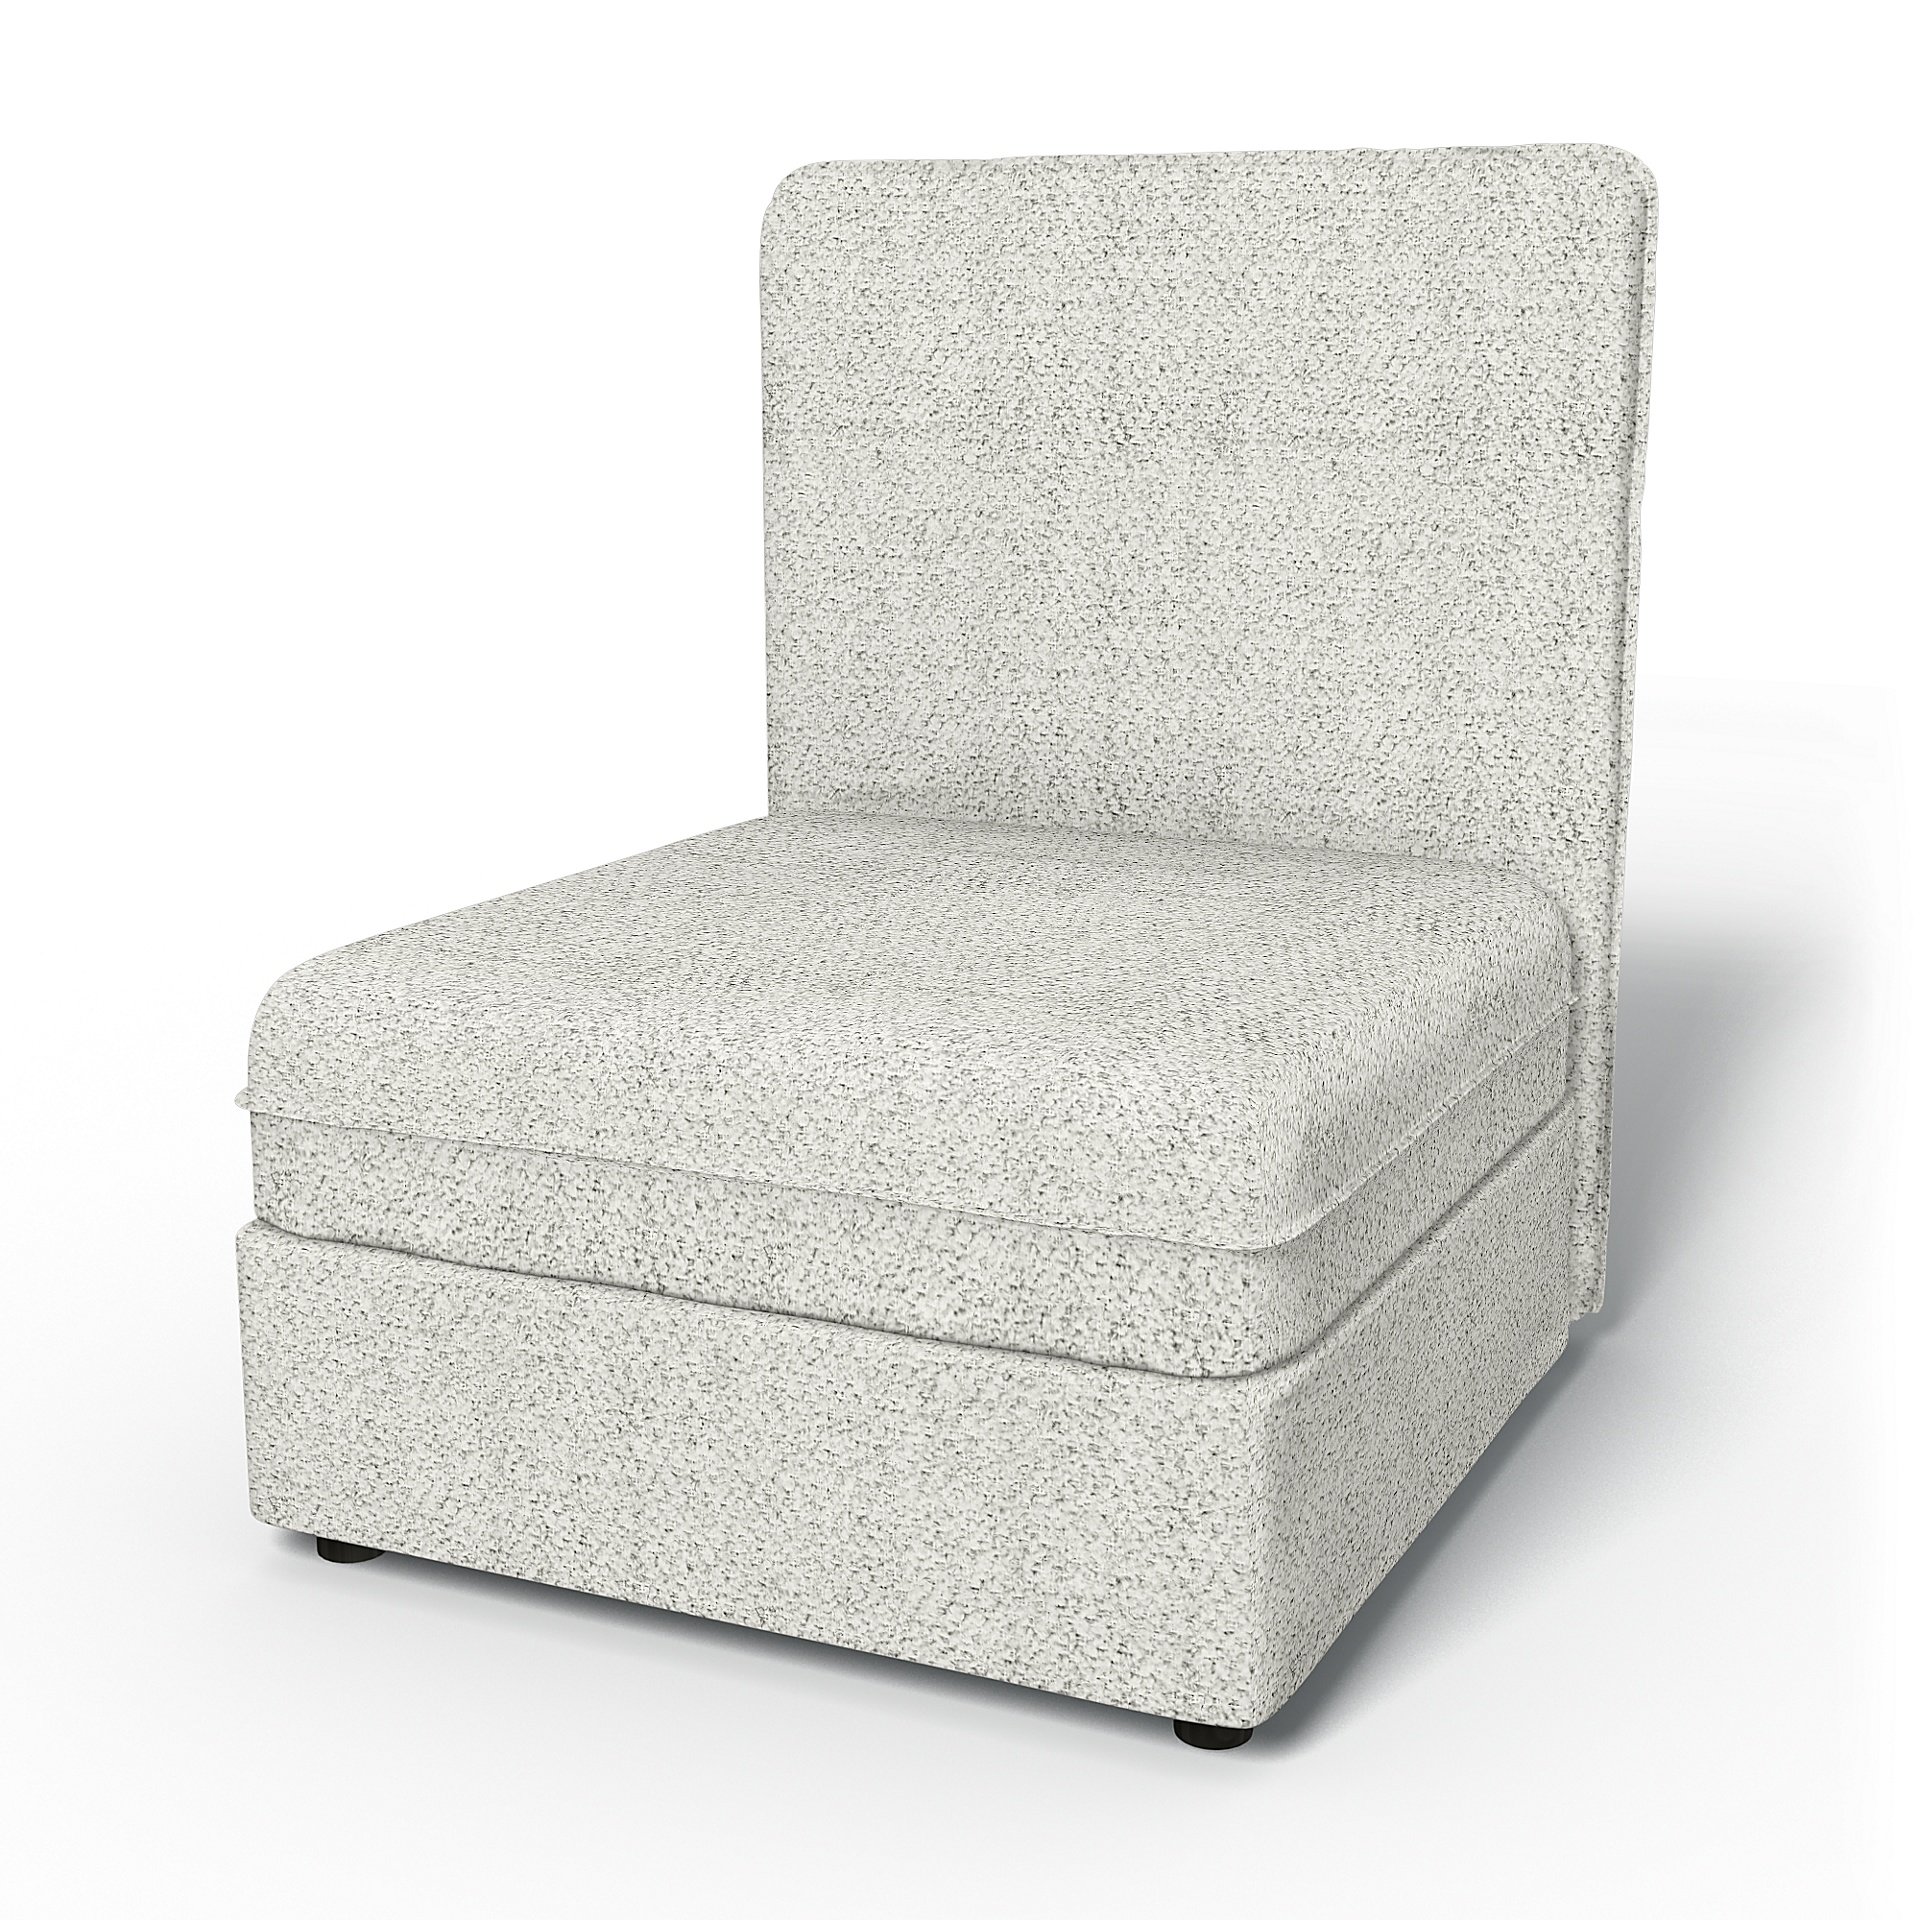 IKEA - Vallentuna Seat Module with High Back and Storage Cover 80x100cm 32x39in, Ivory, Boucle & Tex